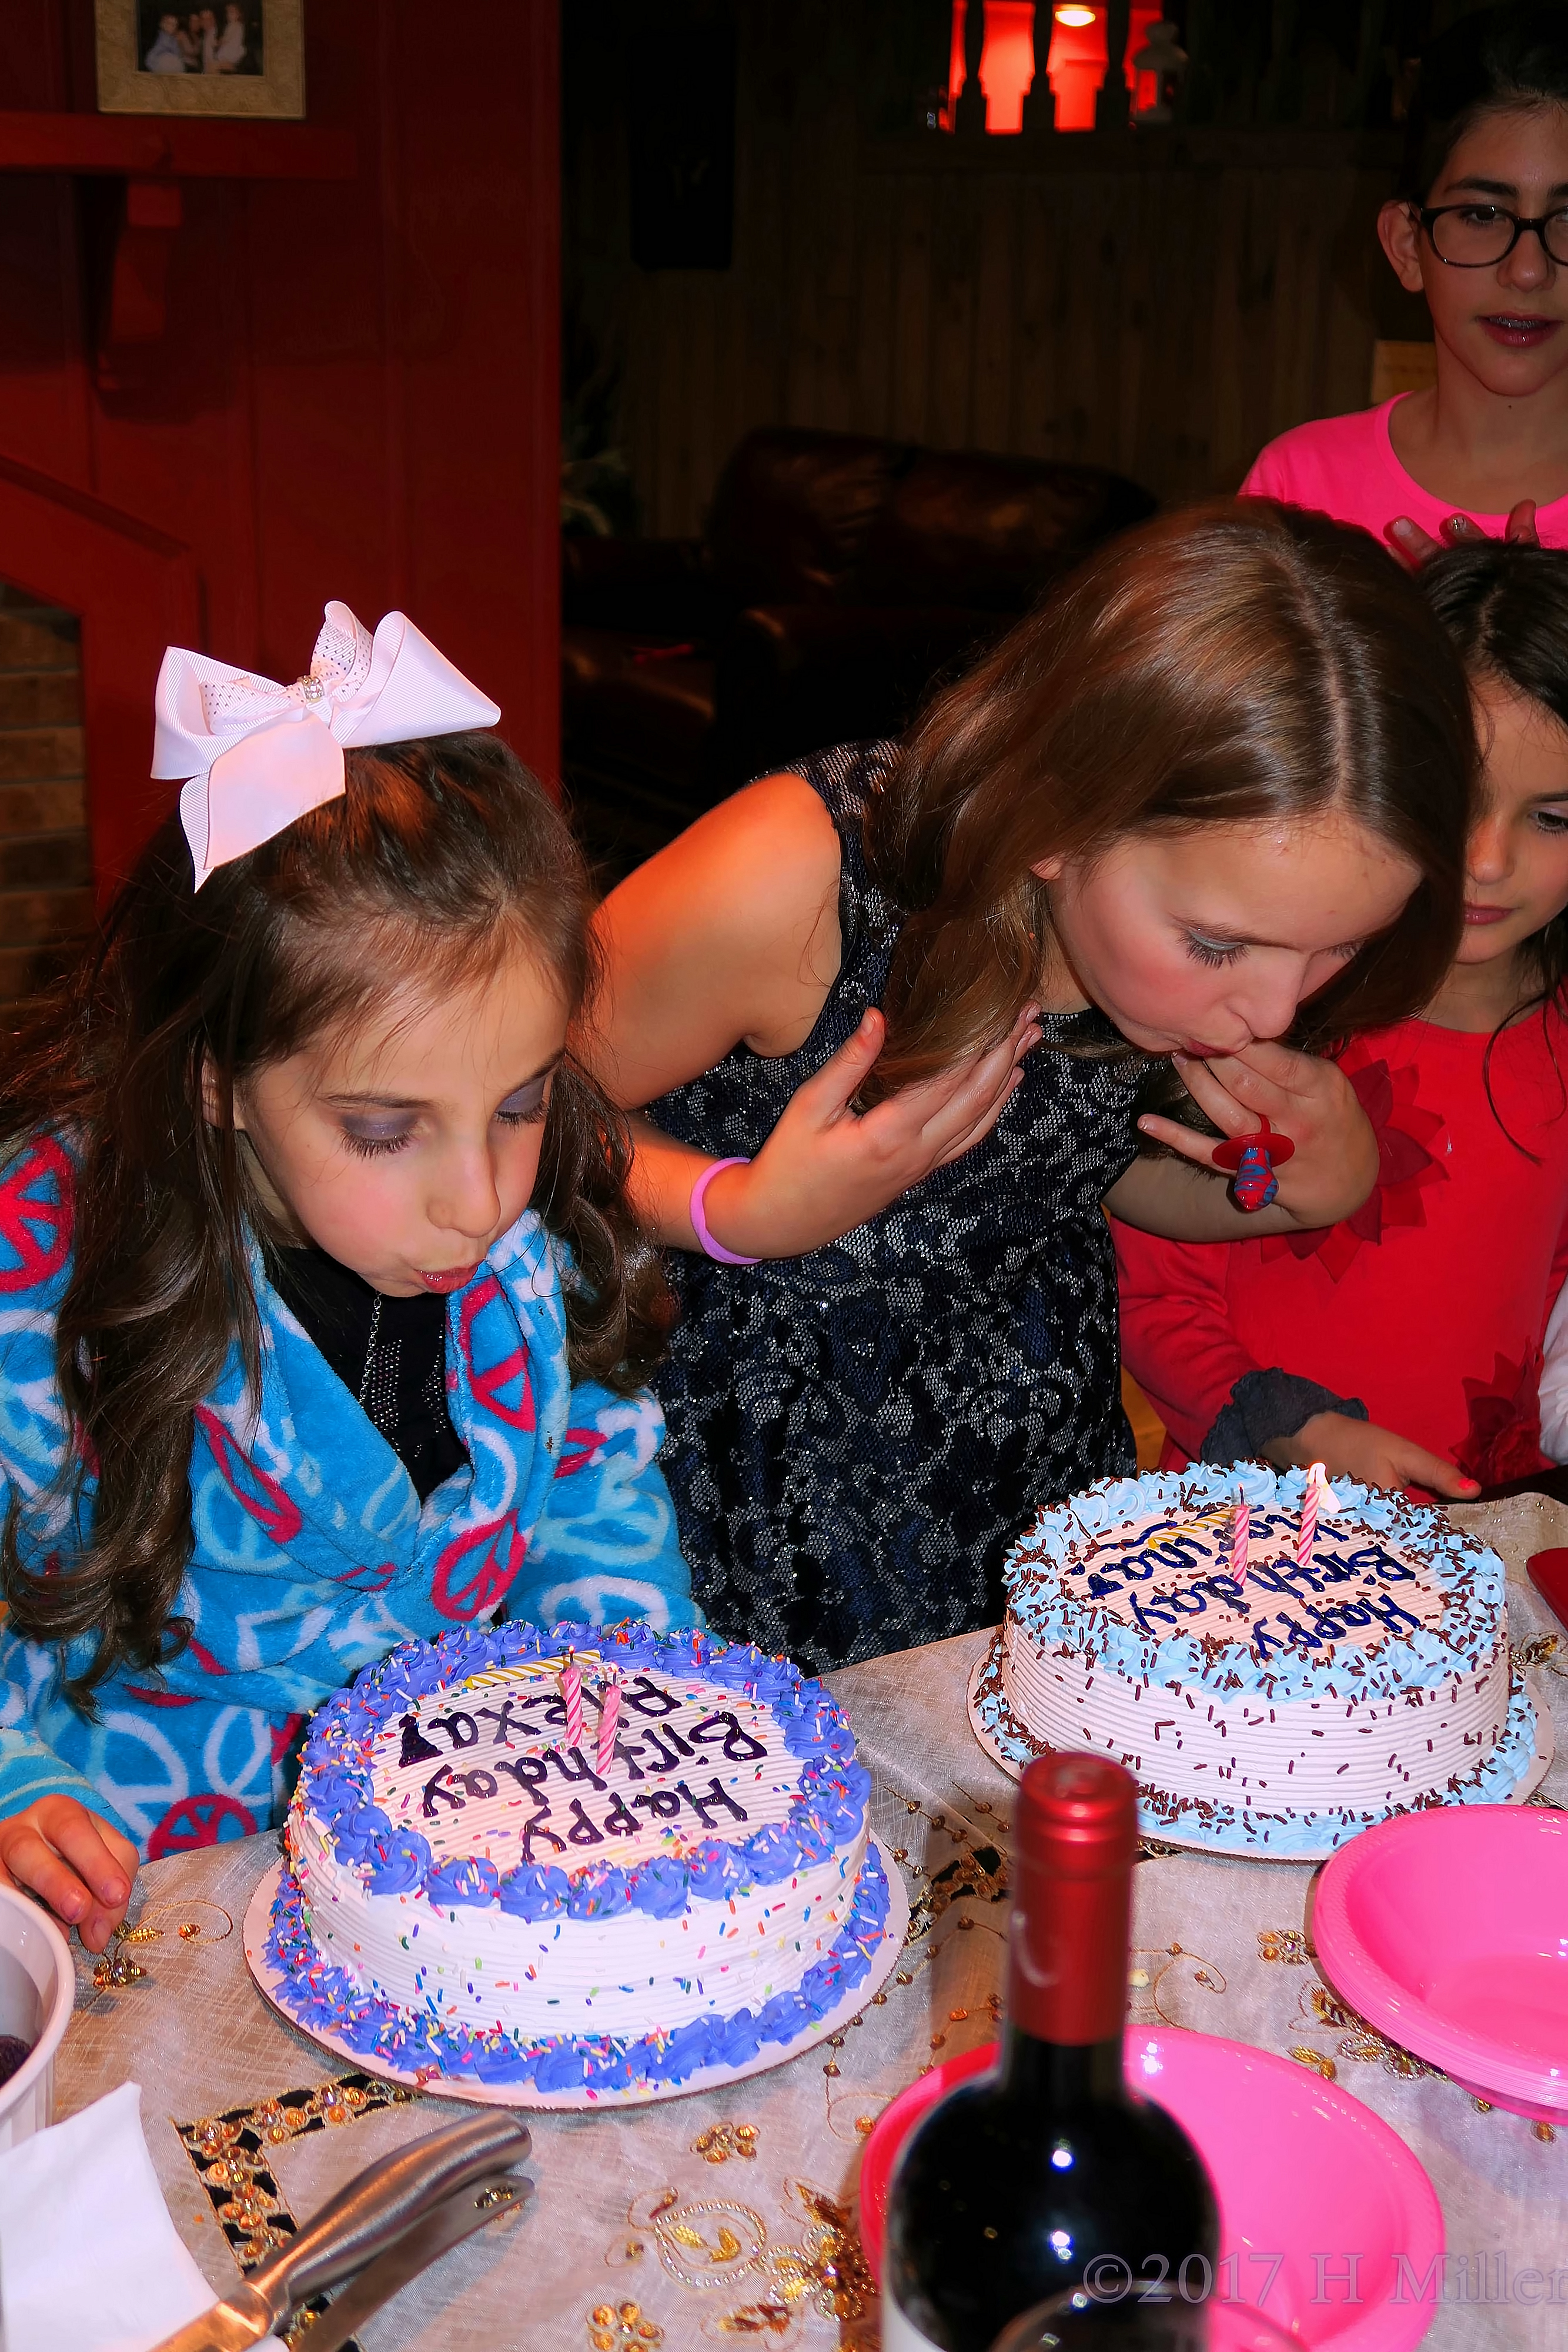 Alexa And Karina Blow Out The Candles On Their Spa Birthday Cakes! 